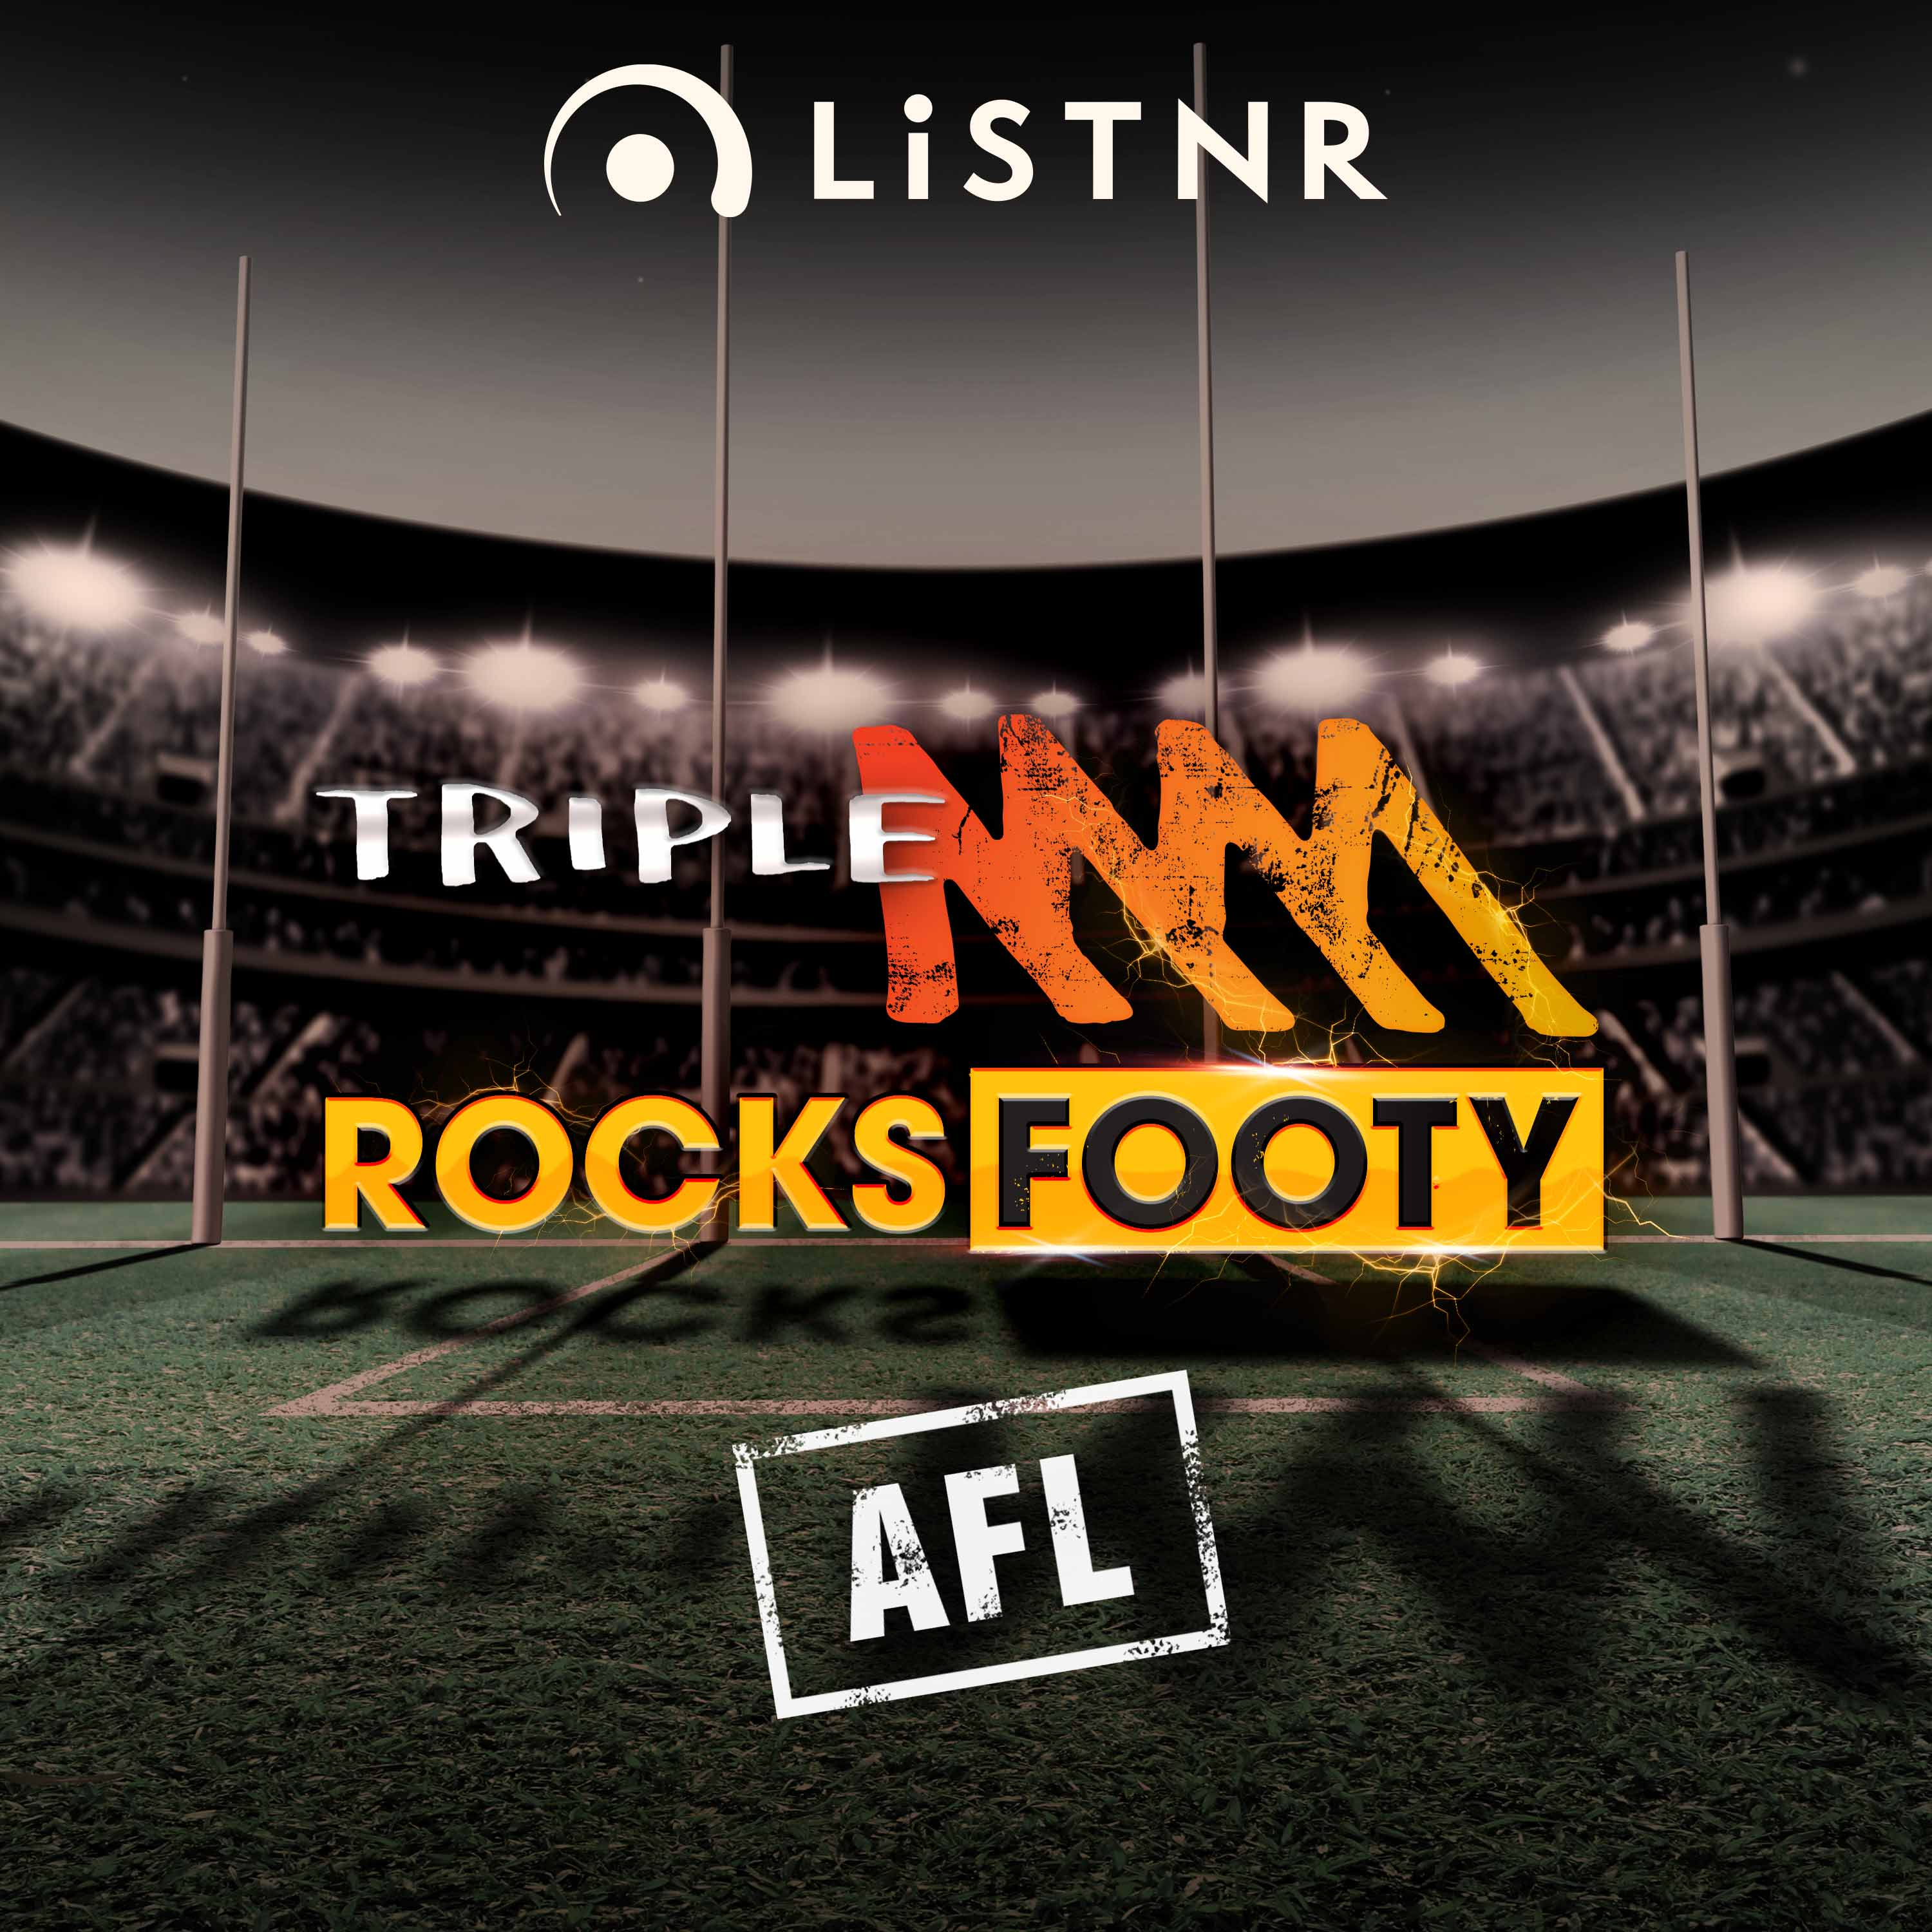 Triple M's call of Chad Warner's unbelievable mark and goal